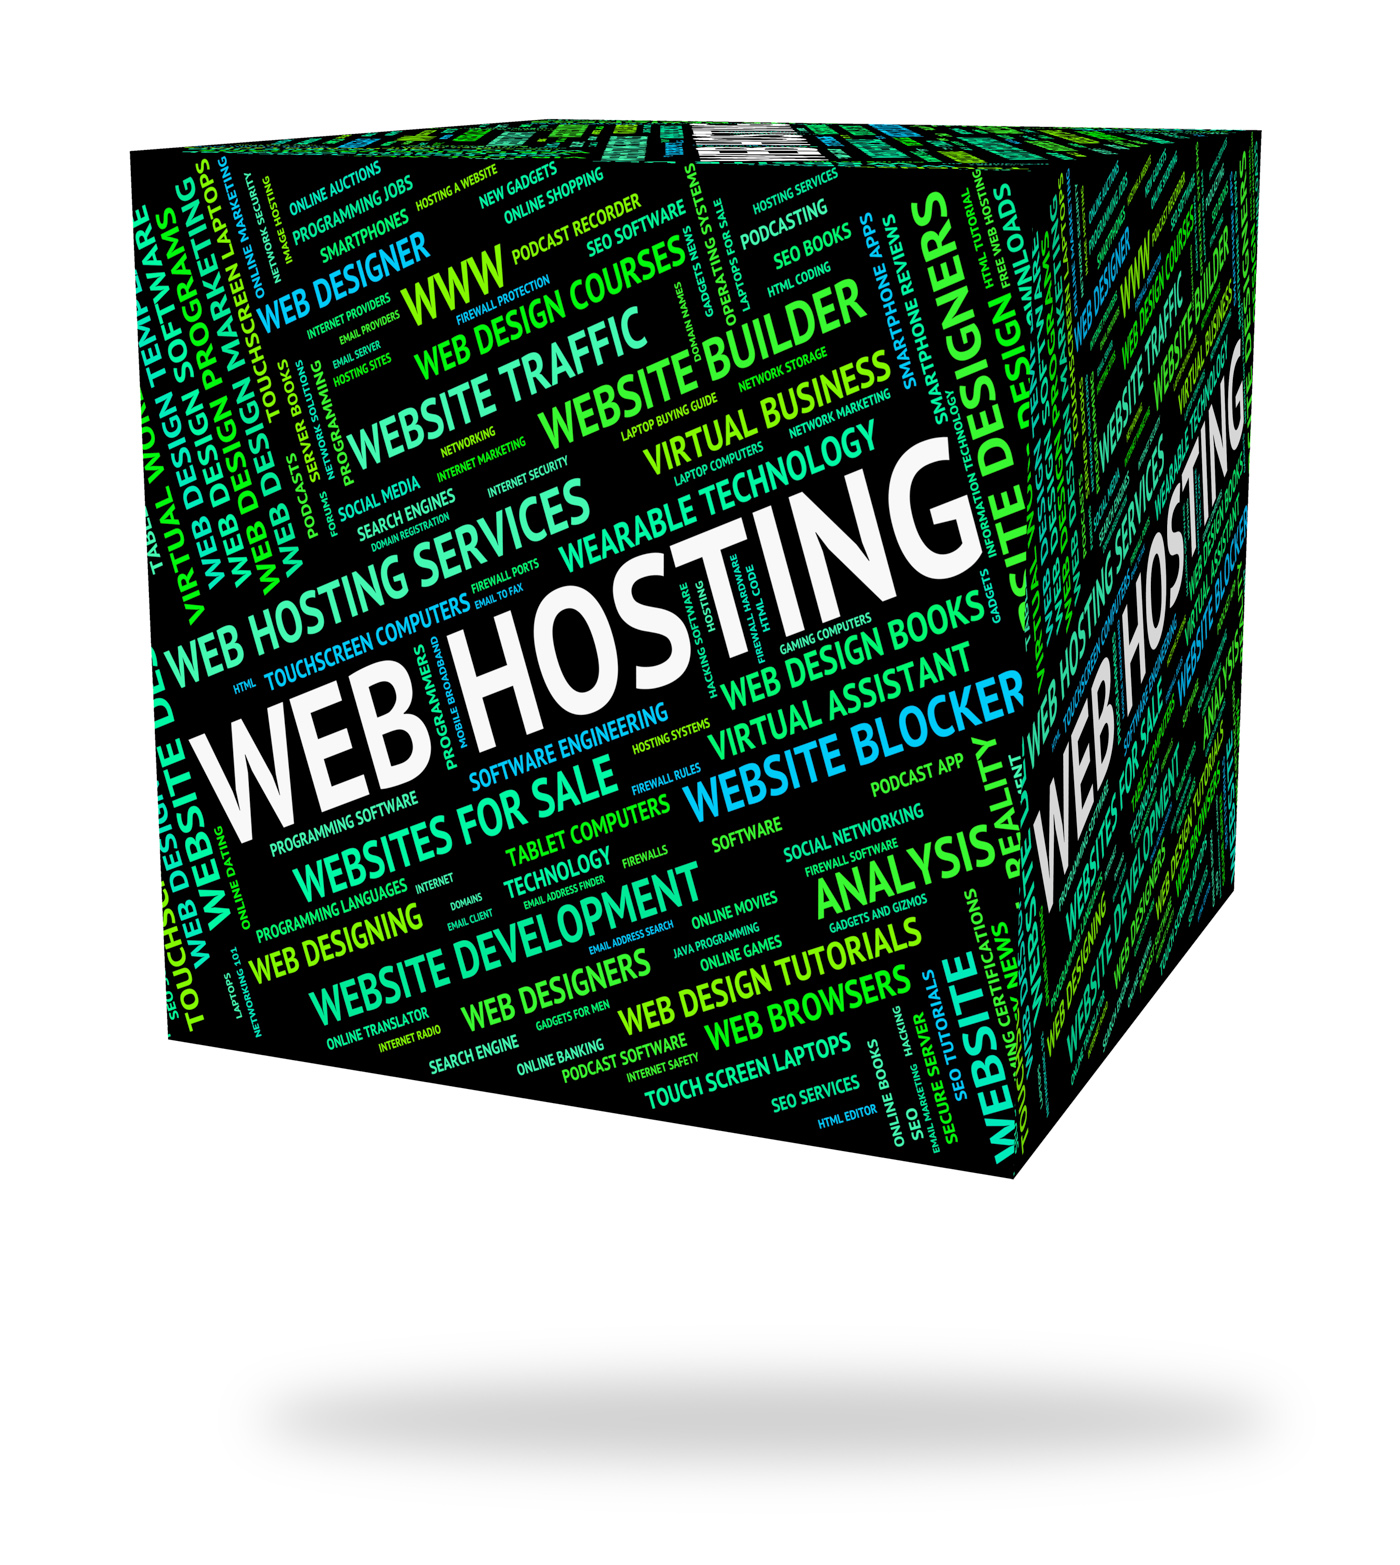 Web hosting means net webhost and text photo